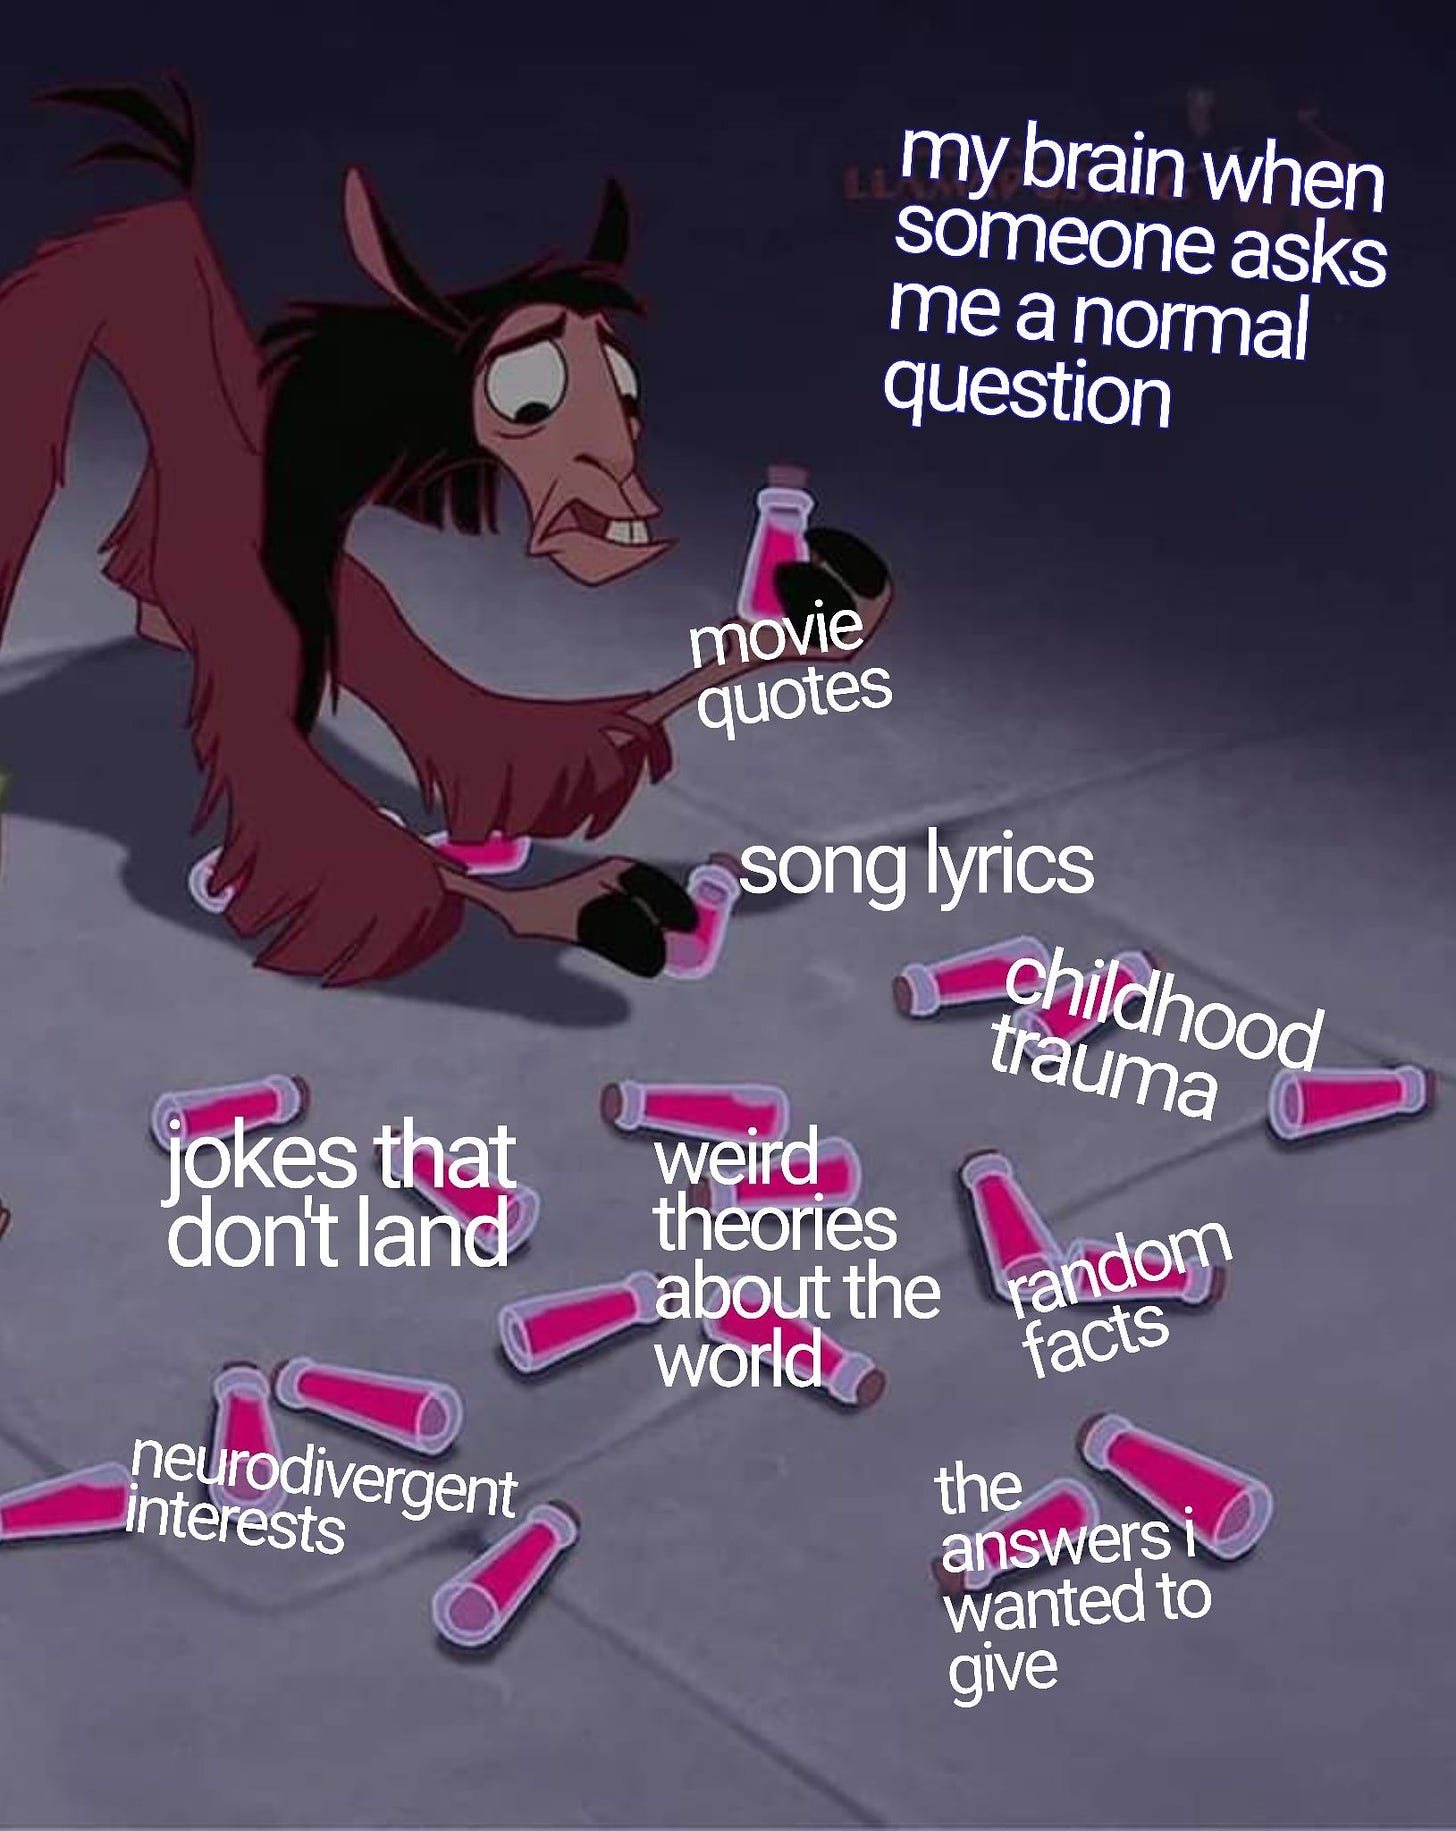 Llama Kuzco from Emperor’s New Groove, low to the ground, staring at a floor full of many scattered pink bottles, with one in each hoof. Dark purple background that fades from top of frame to bottom into a purple/greyish floor. There is text in white font in the top right corner that reads: “my brain when someone asks me a normal question”, with overlayed text in white font over several scattered bottles that read: “song lyrics”, “movie quotes”, “childhood trauma”, “random facts”, “the answers I wanted to give”, “weird theories about the world”, “jokes that don’t land”, “neurodivergent interests”.